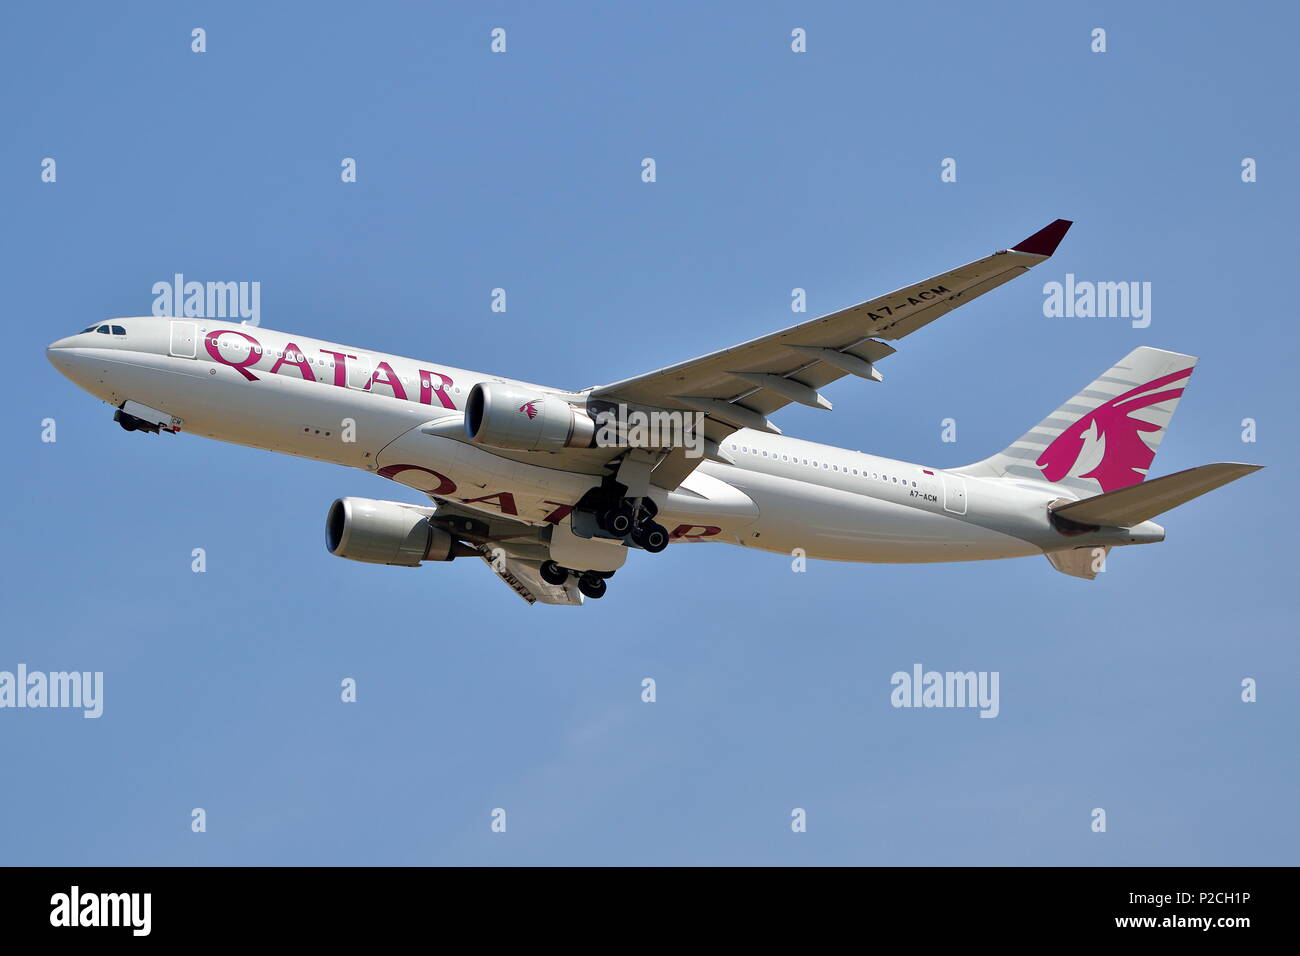 Qatar Airlines Airbus A330 A7-ACM taking off from London Heathrow Airport, UK Stock Photo